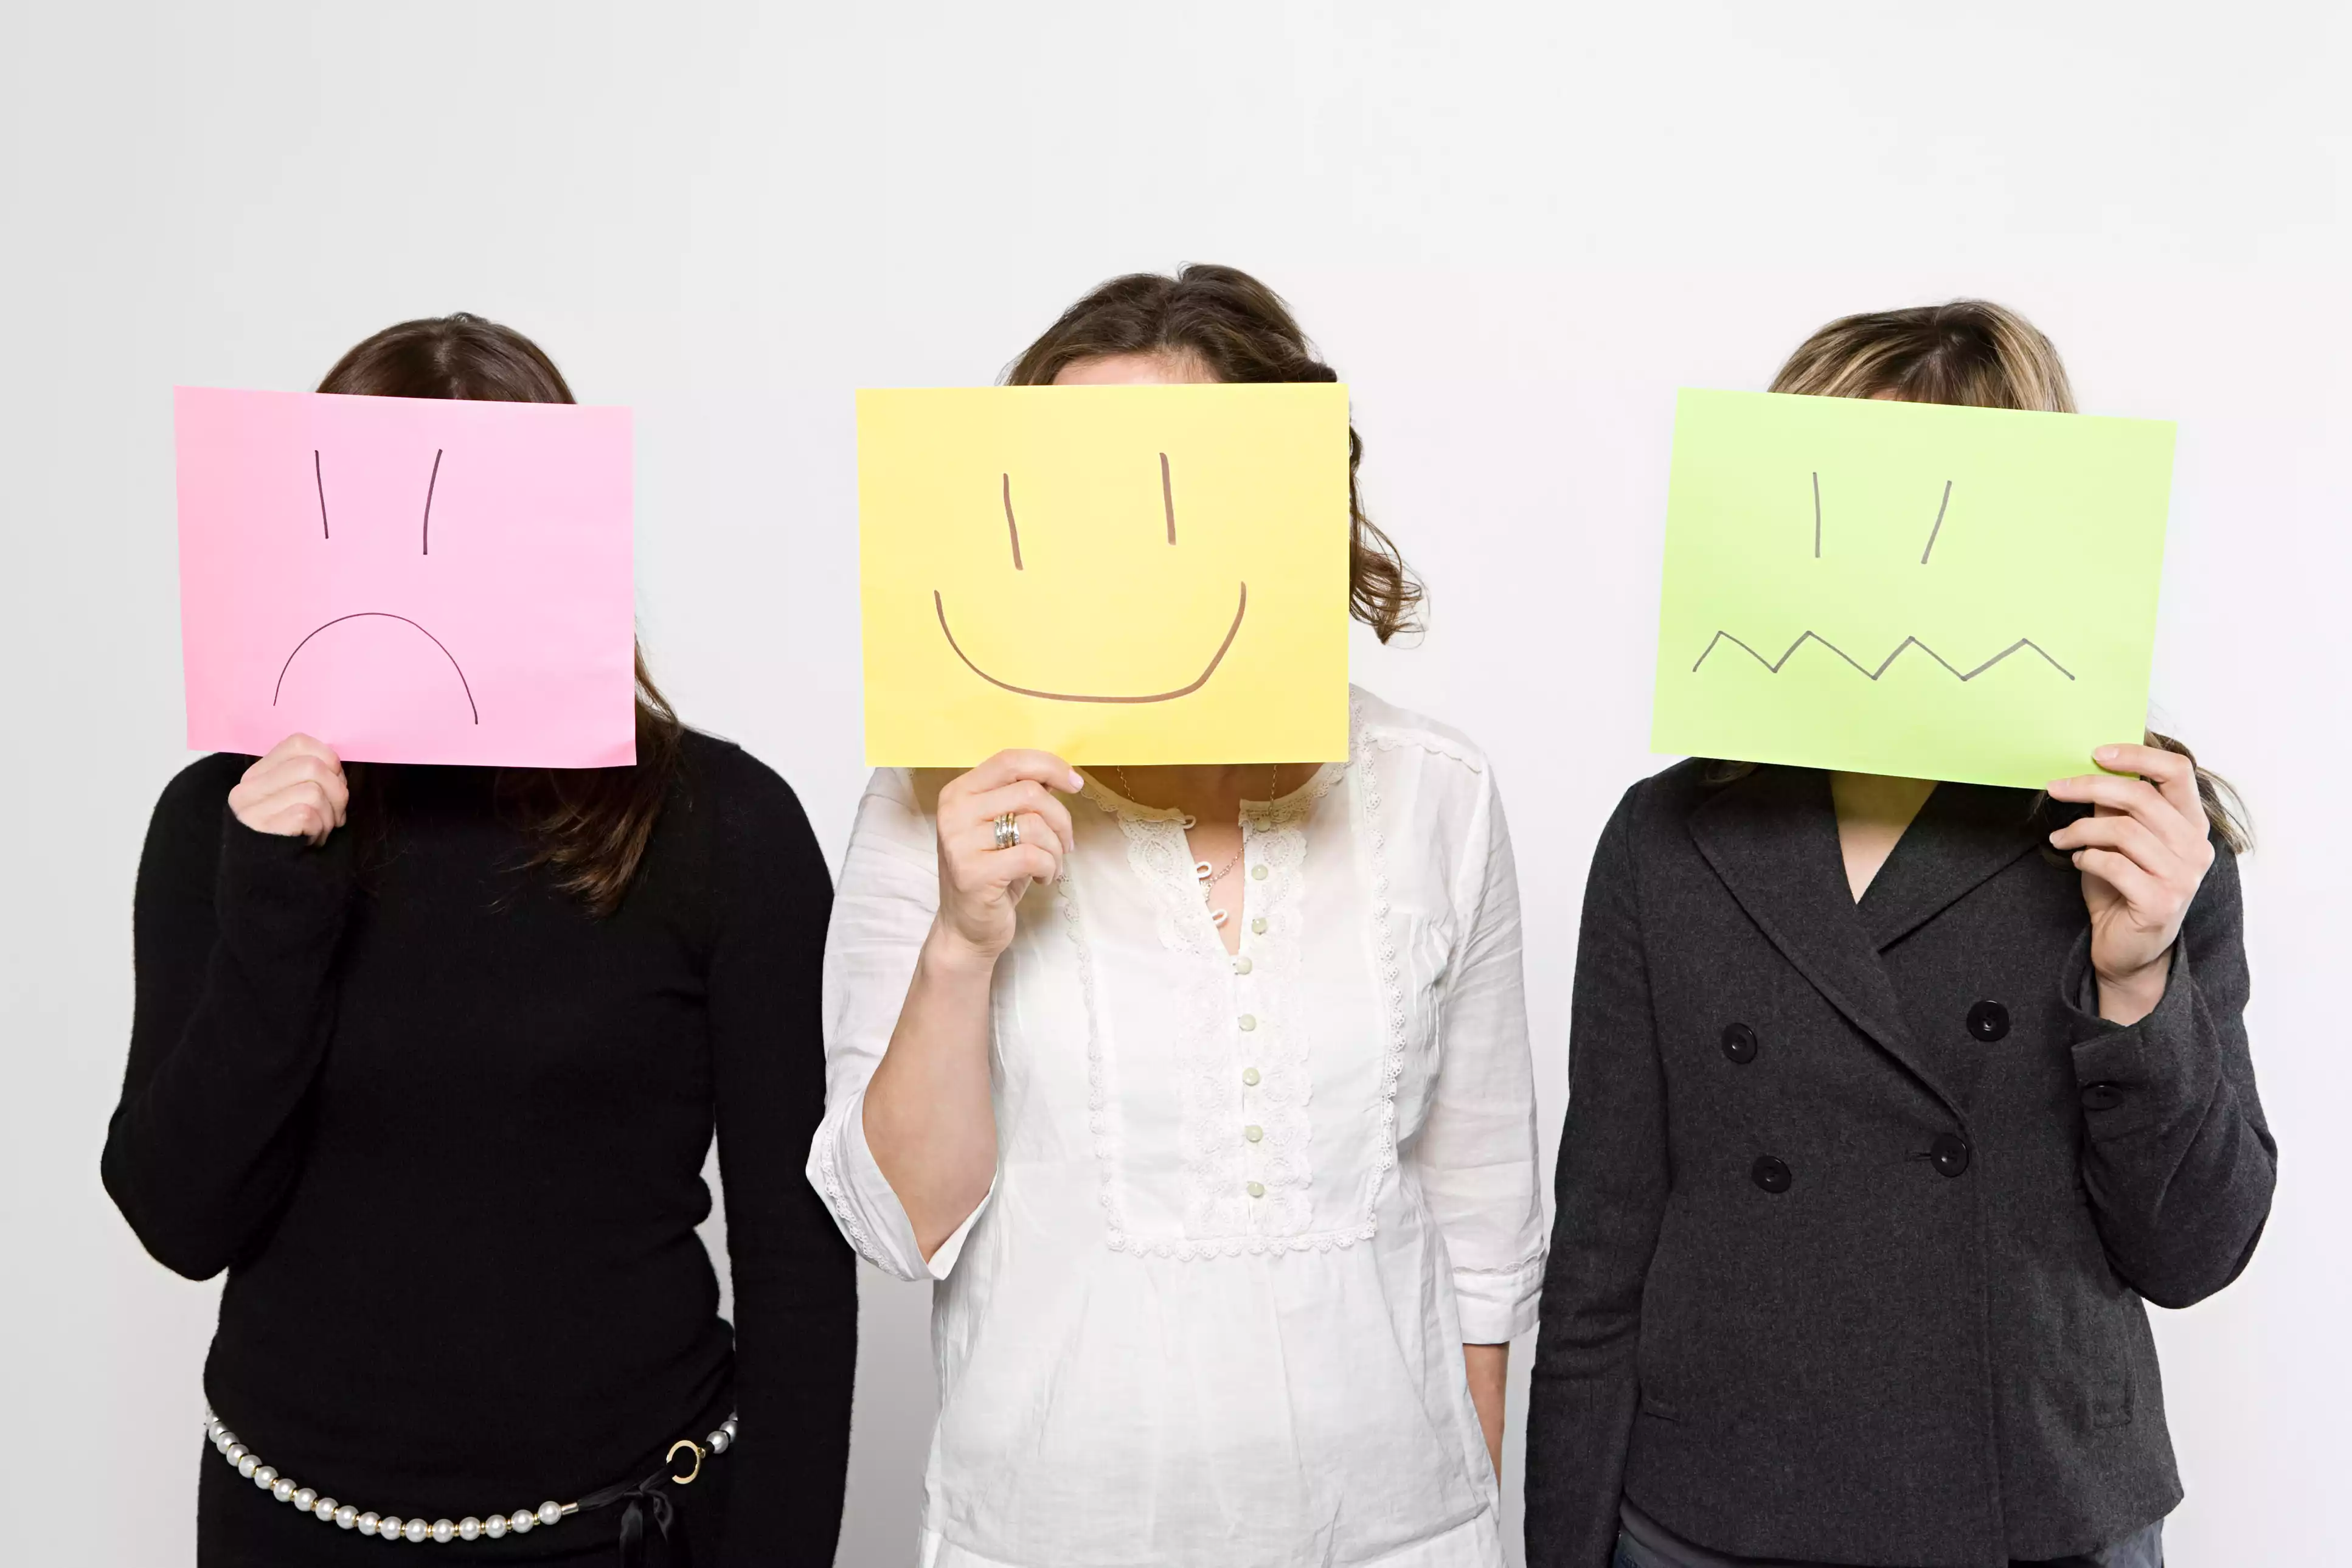 Three women holding papers over their faces with different expressions drawn on